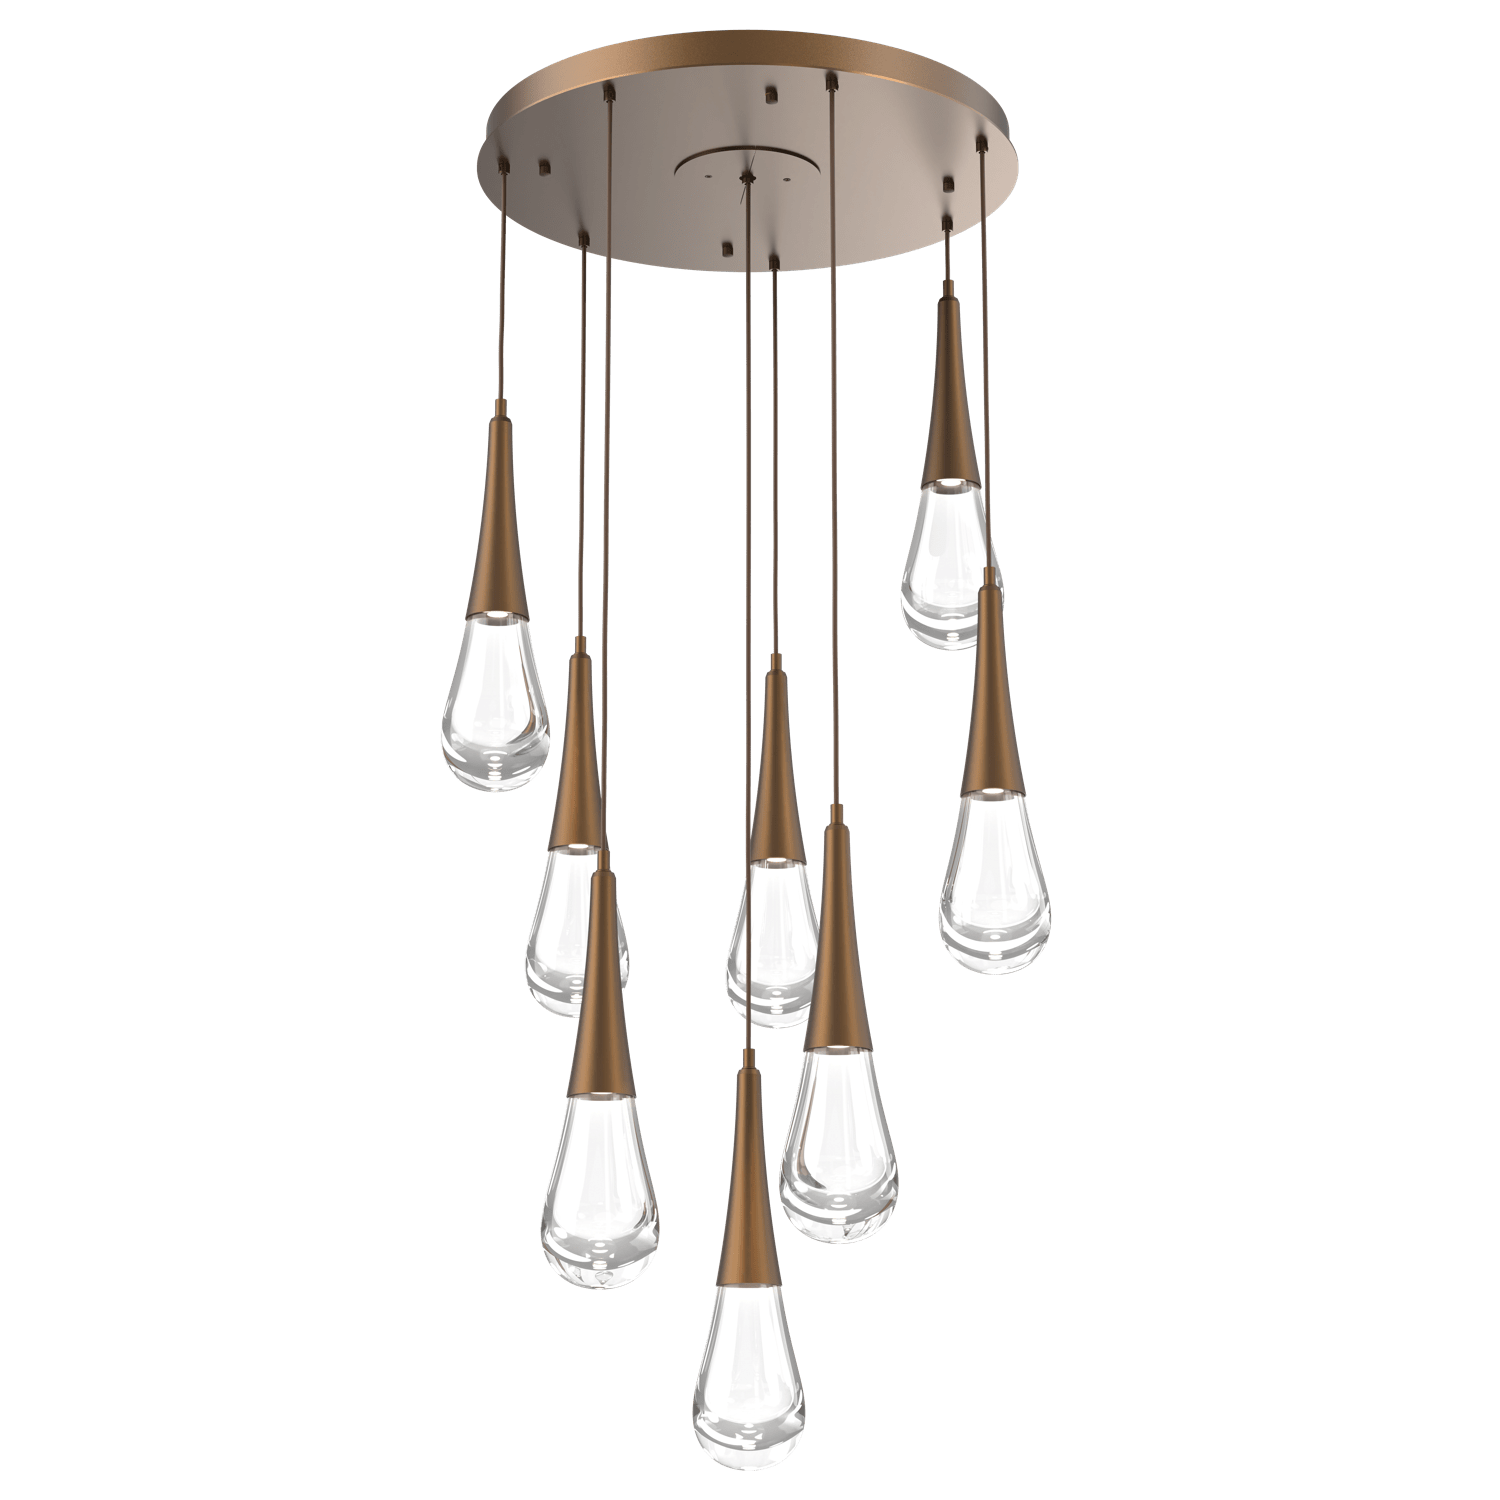 CHB0078-08-FB-Hammerton-Studio-Raindrop-8-light-round-pendant-chandelier-with-flat-bronze-finish-and-clear-blown-glass-shades-and-LED-lamping